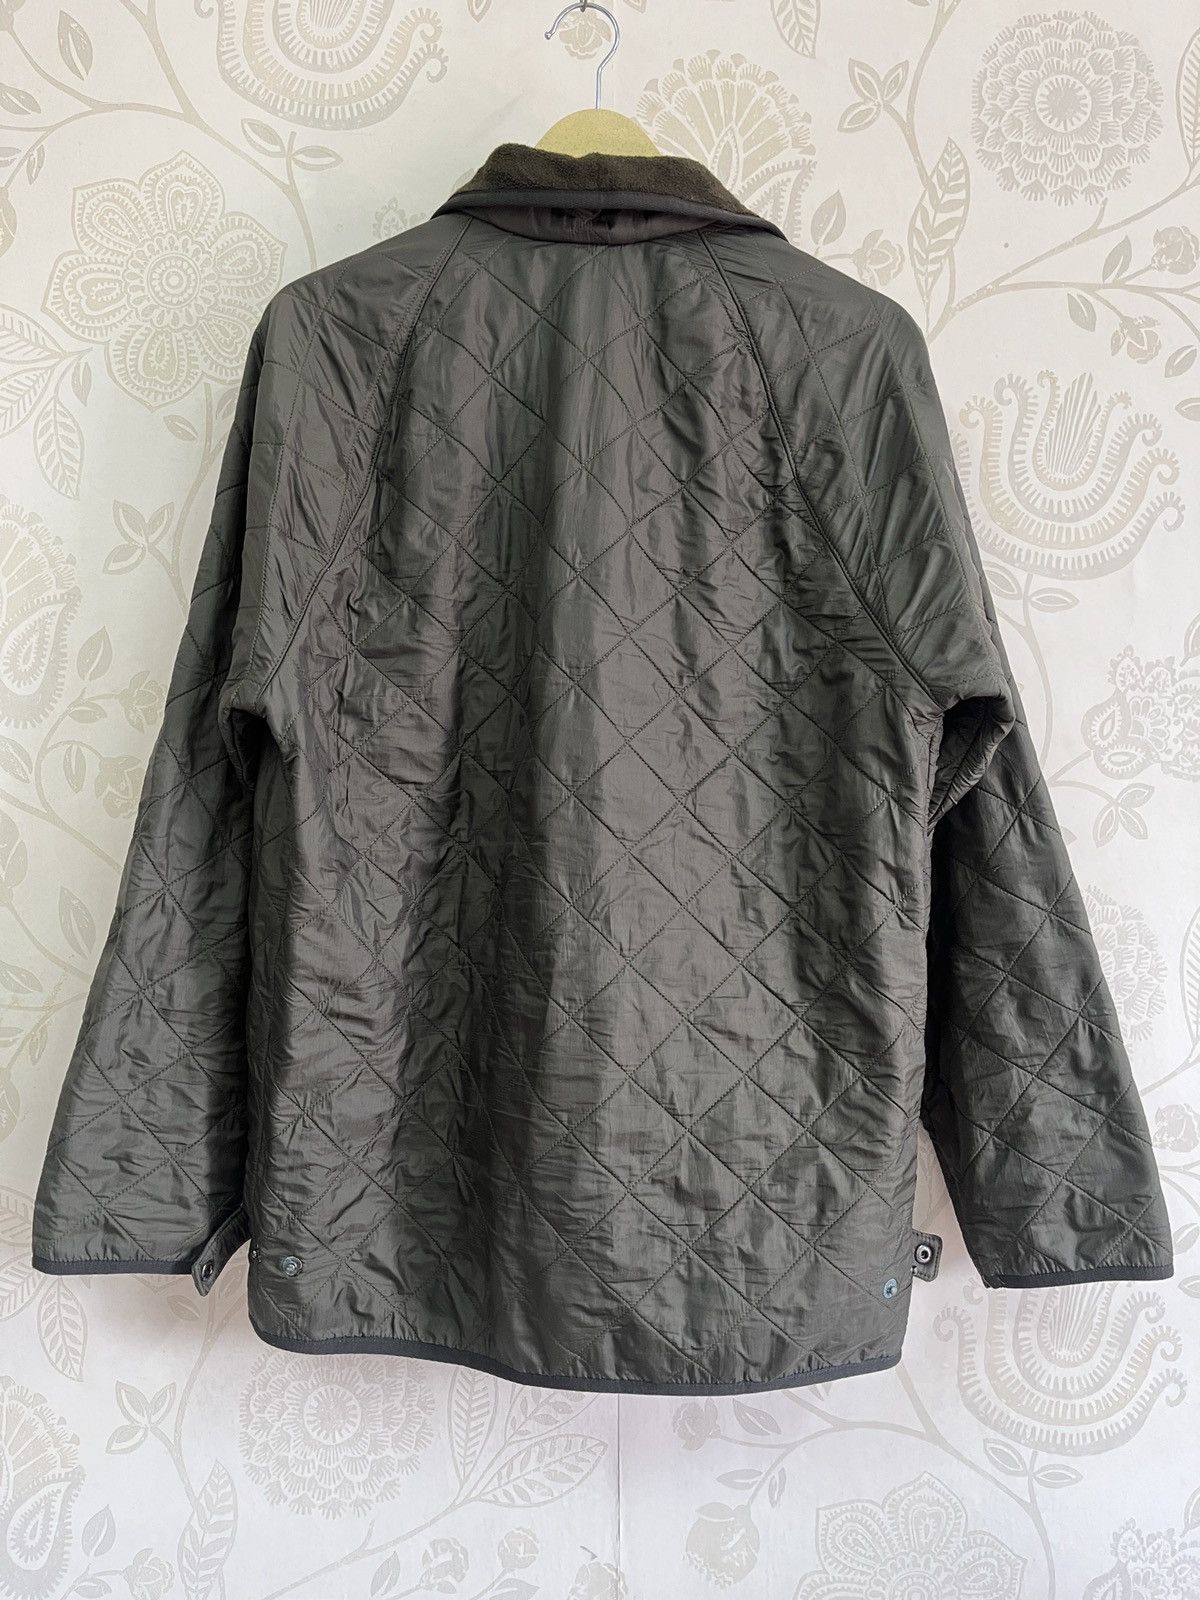 Vintage Barbour Noah Light Jacket Made In Romania - 4